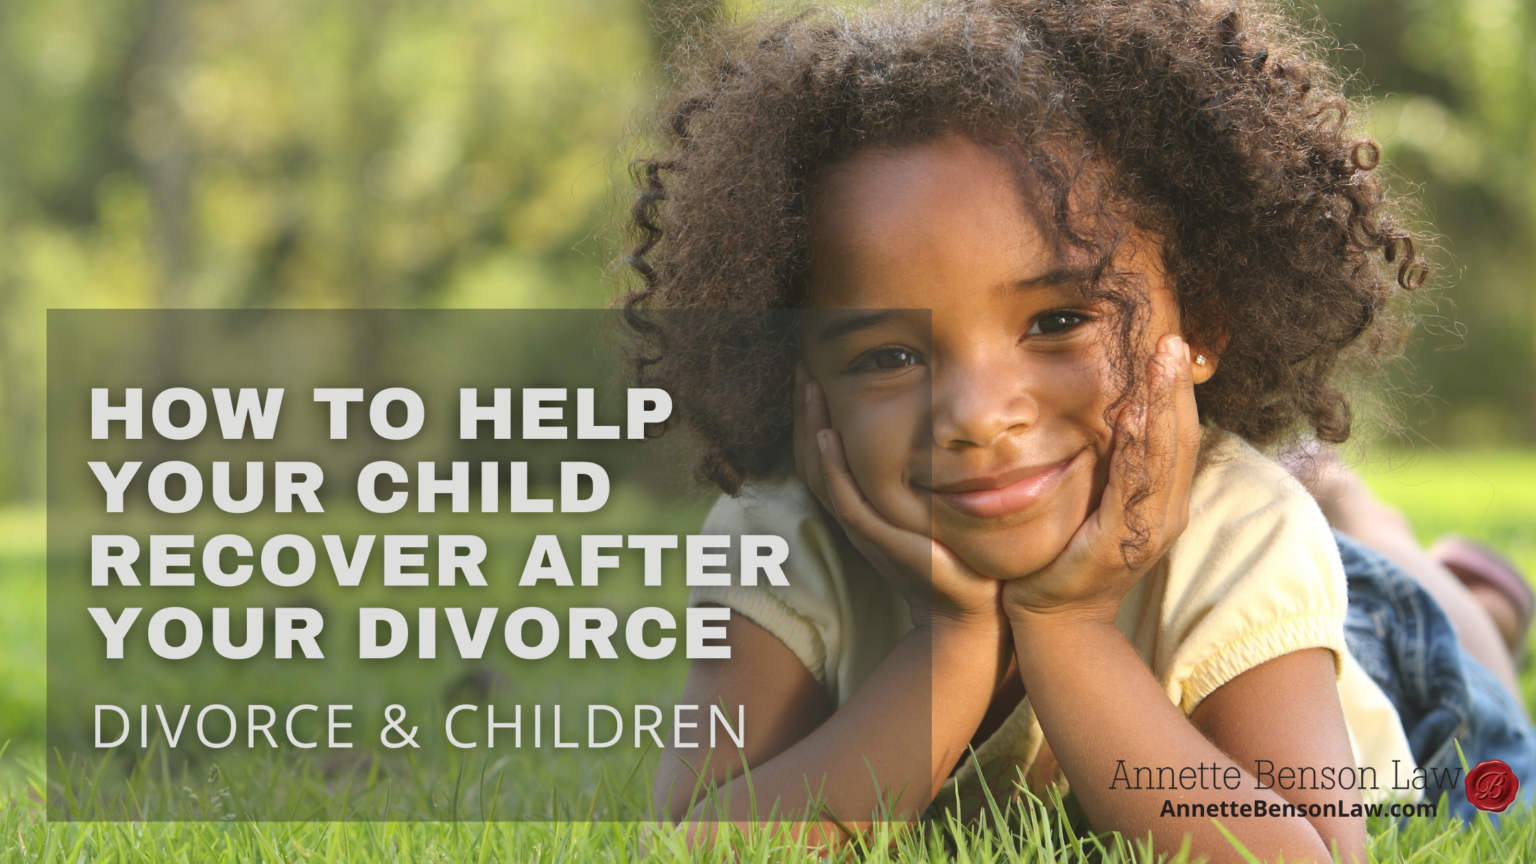 How to help your child recover after your divorce